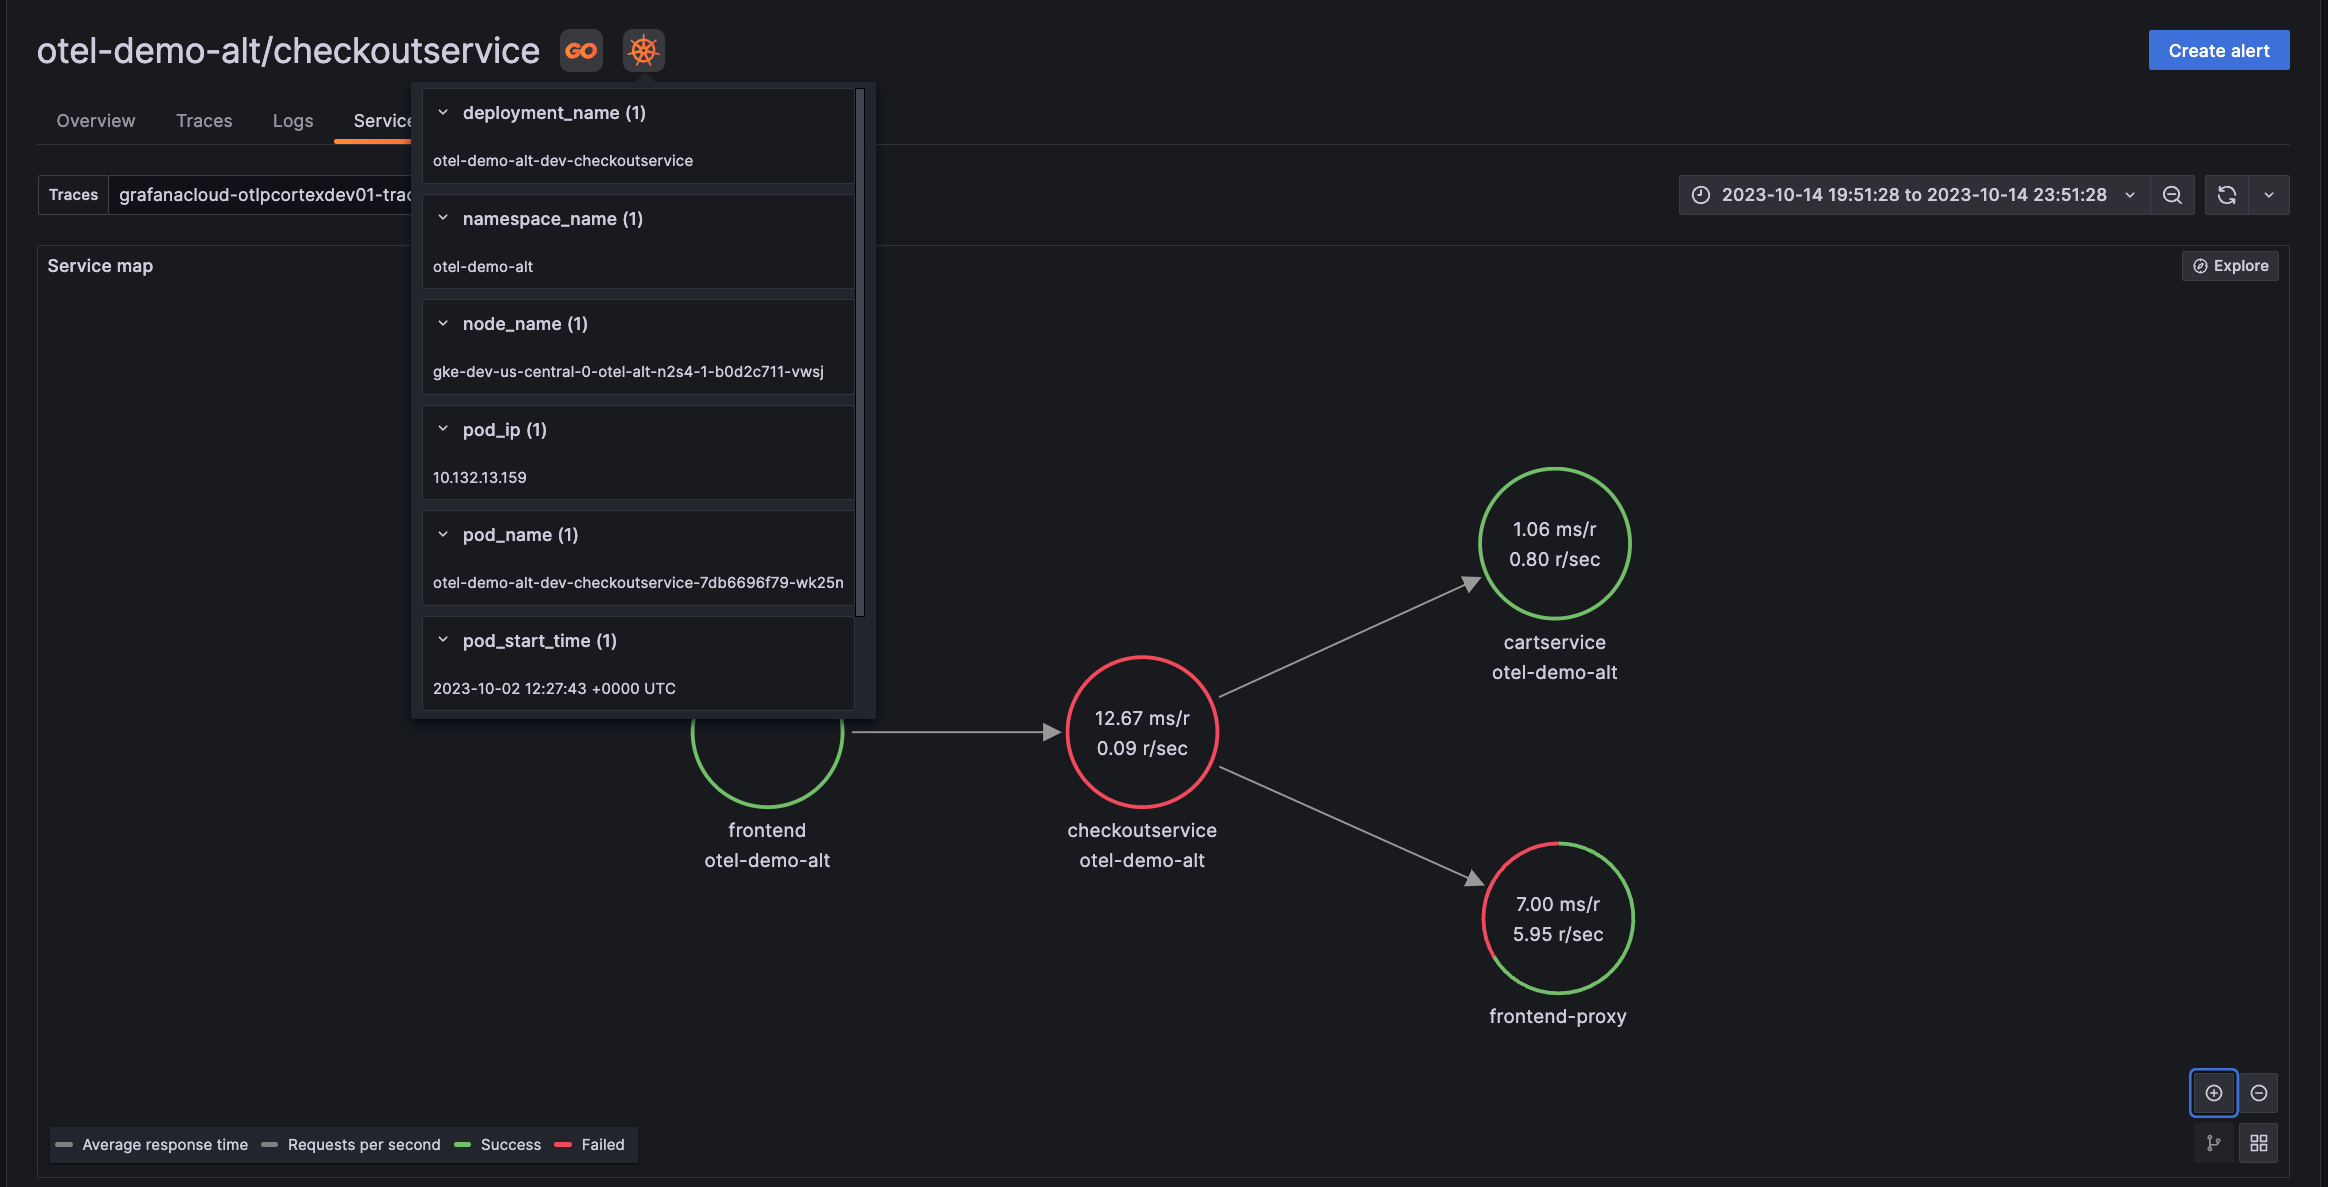 Service map view of applications alongside dependencies and environments in Grafana Cloud Application Observability.